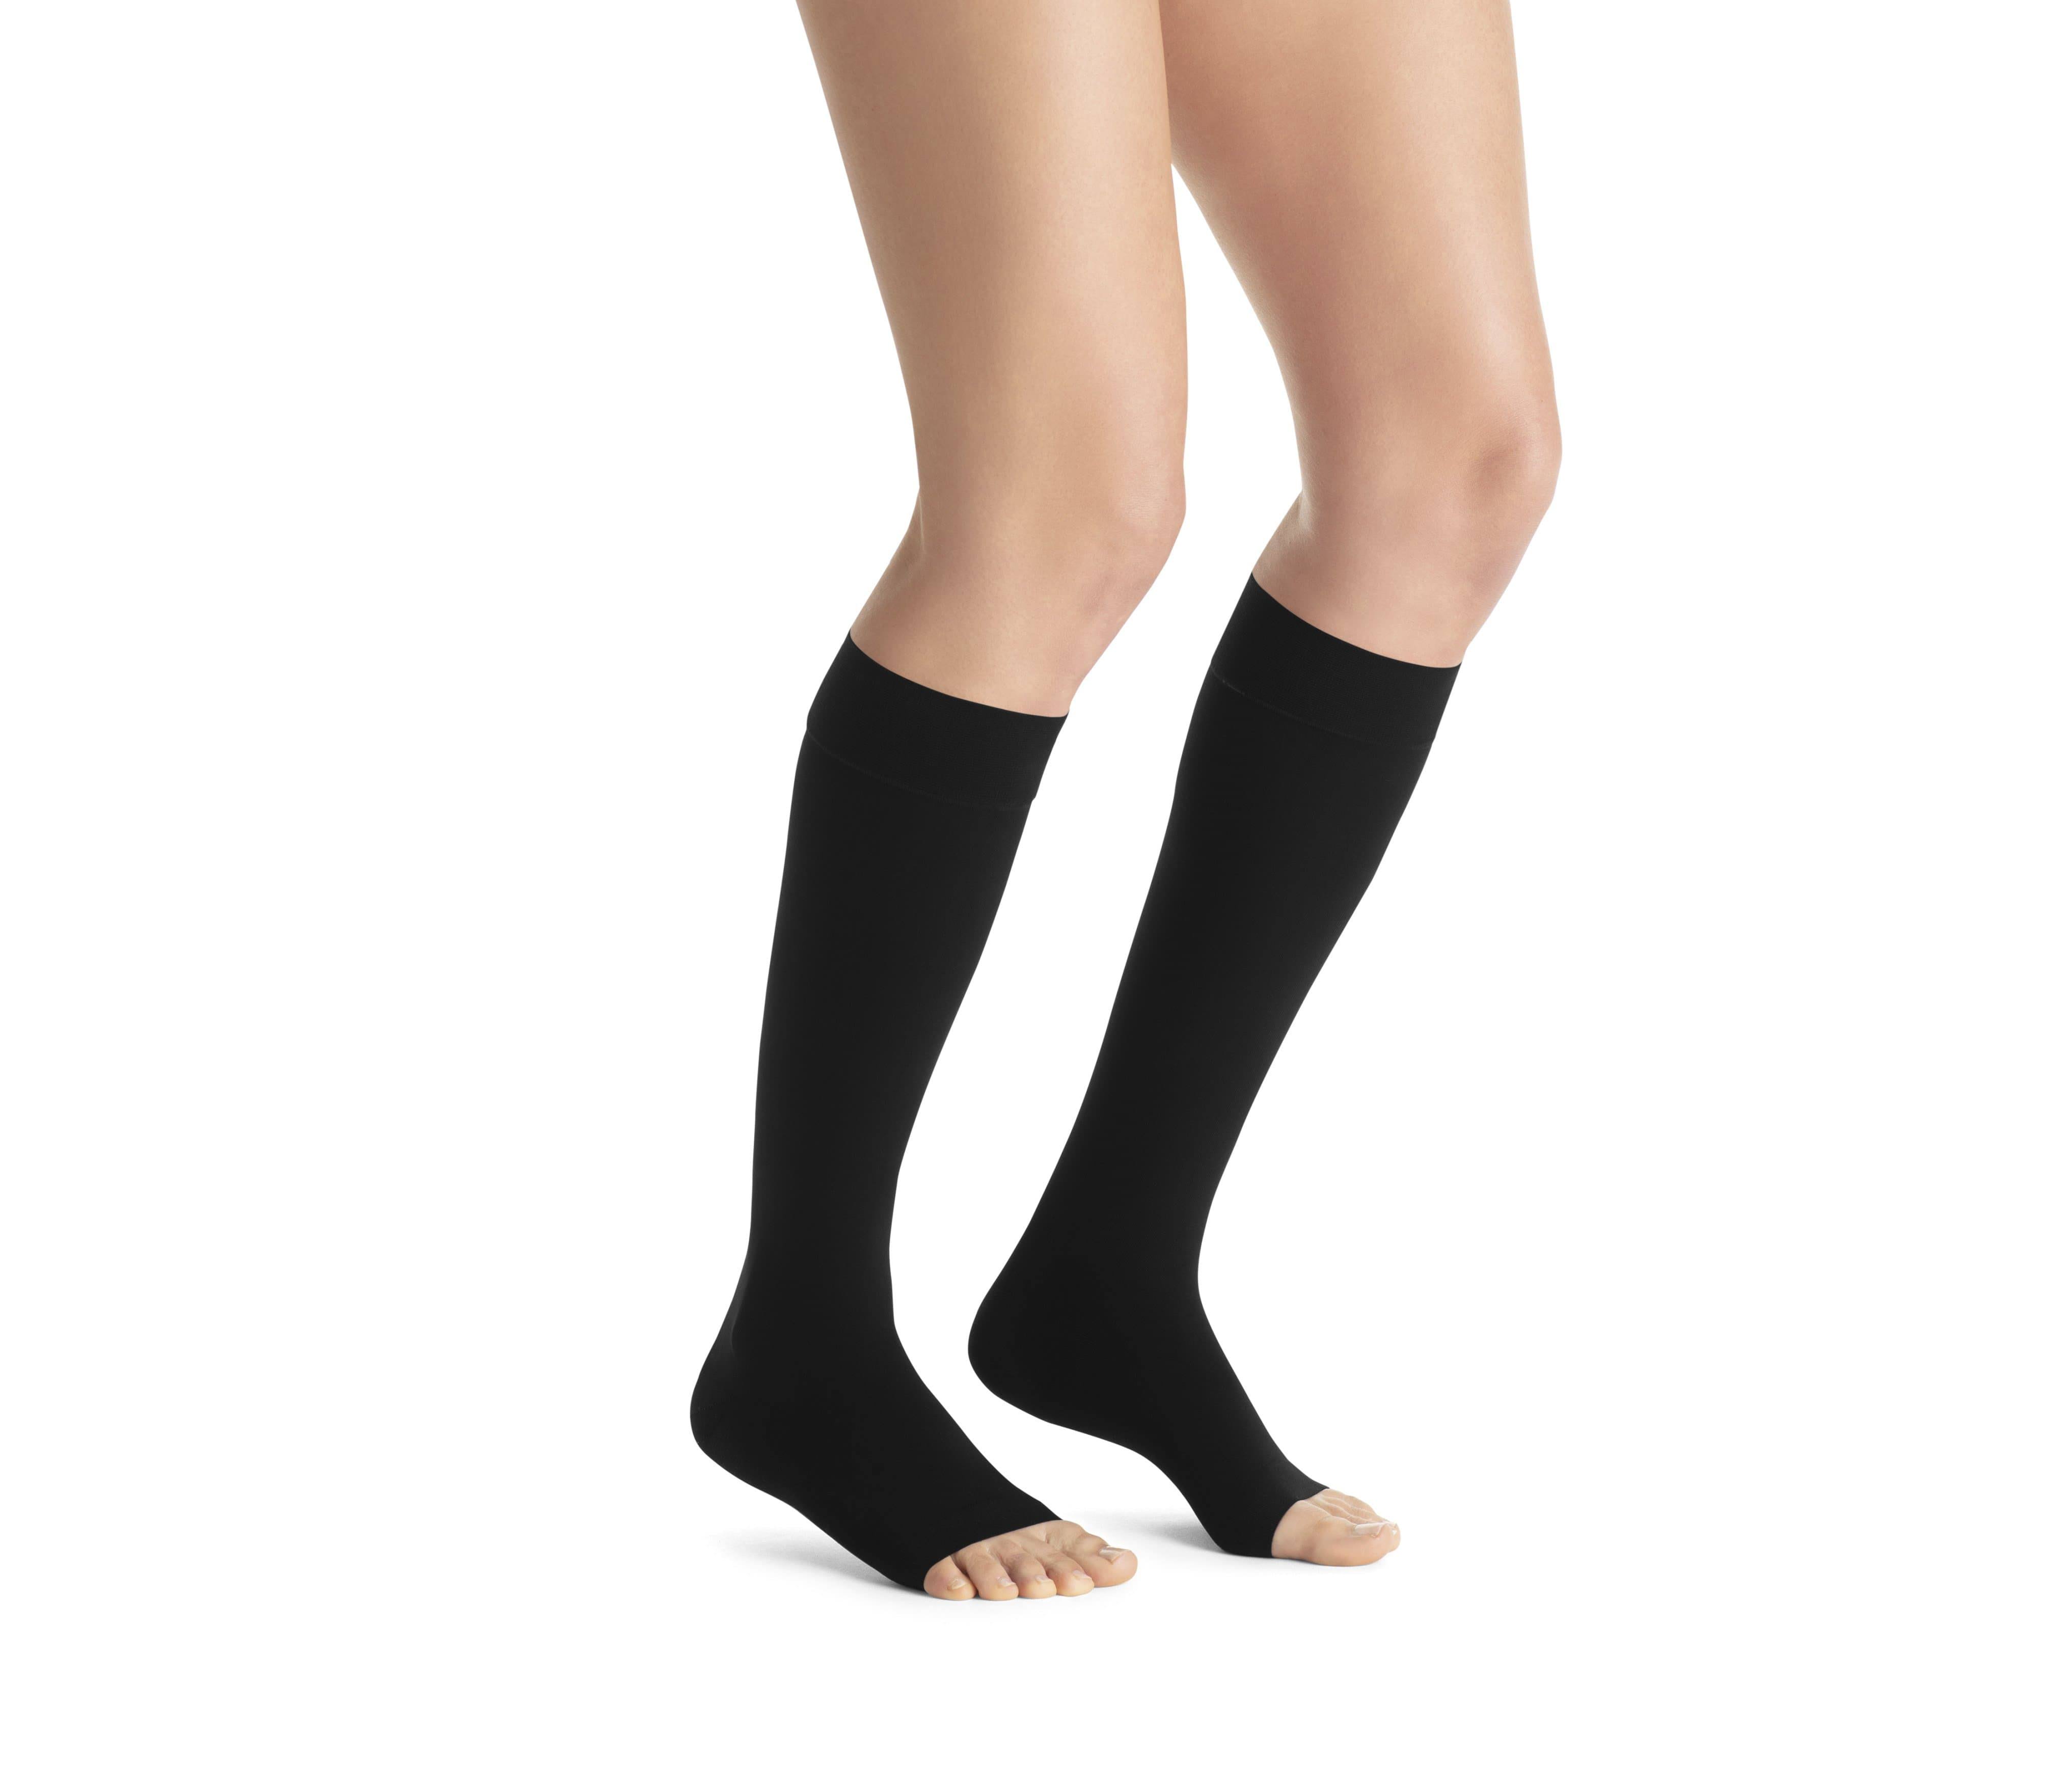 Jobst ActiveWear Athletic Knee High Support Socks - 15-20 mmHg, Cool Black, Small